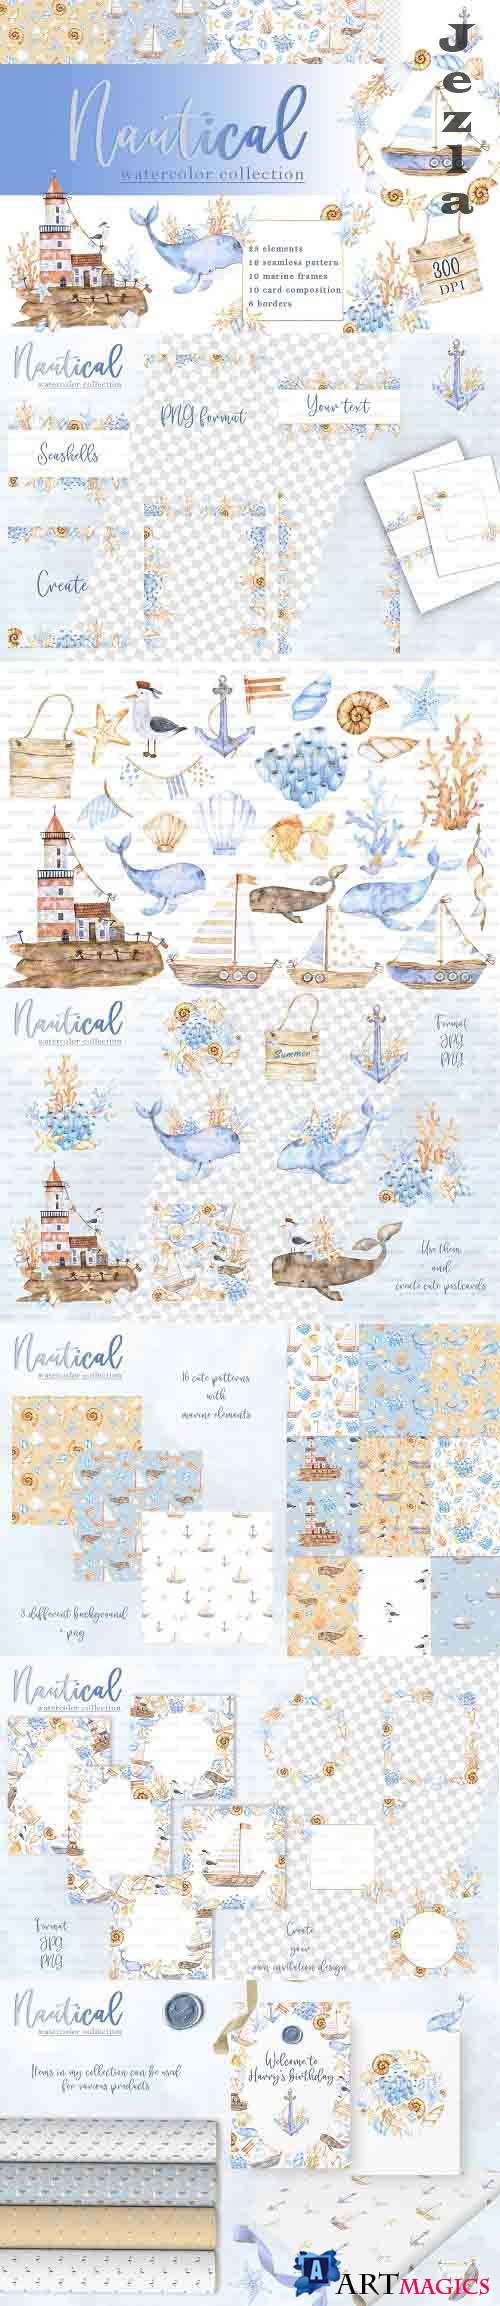 Nautical watercolor collection - 5972469